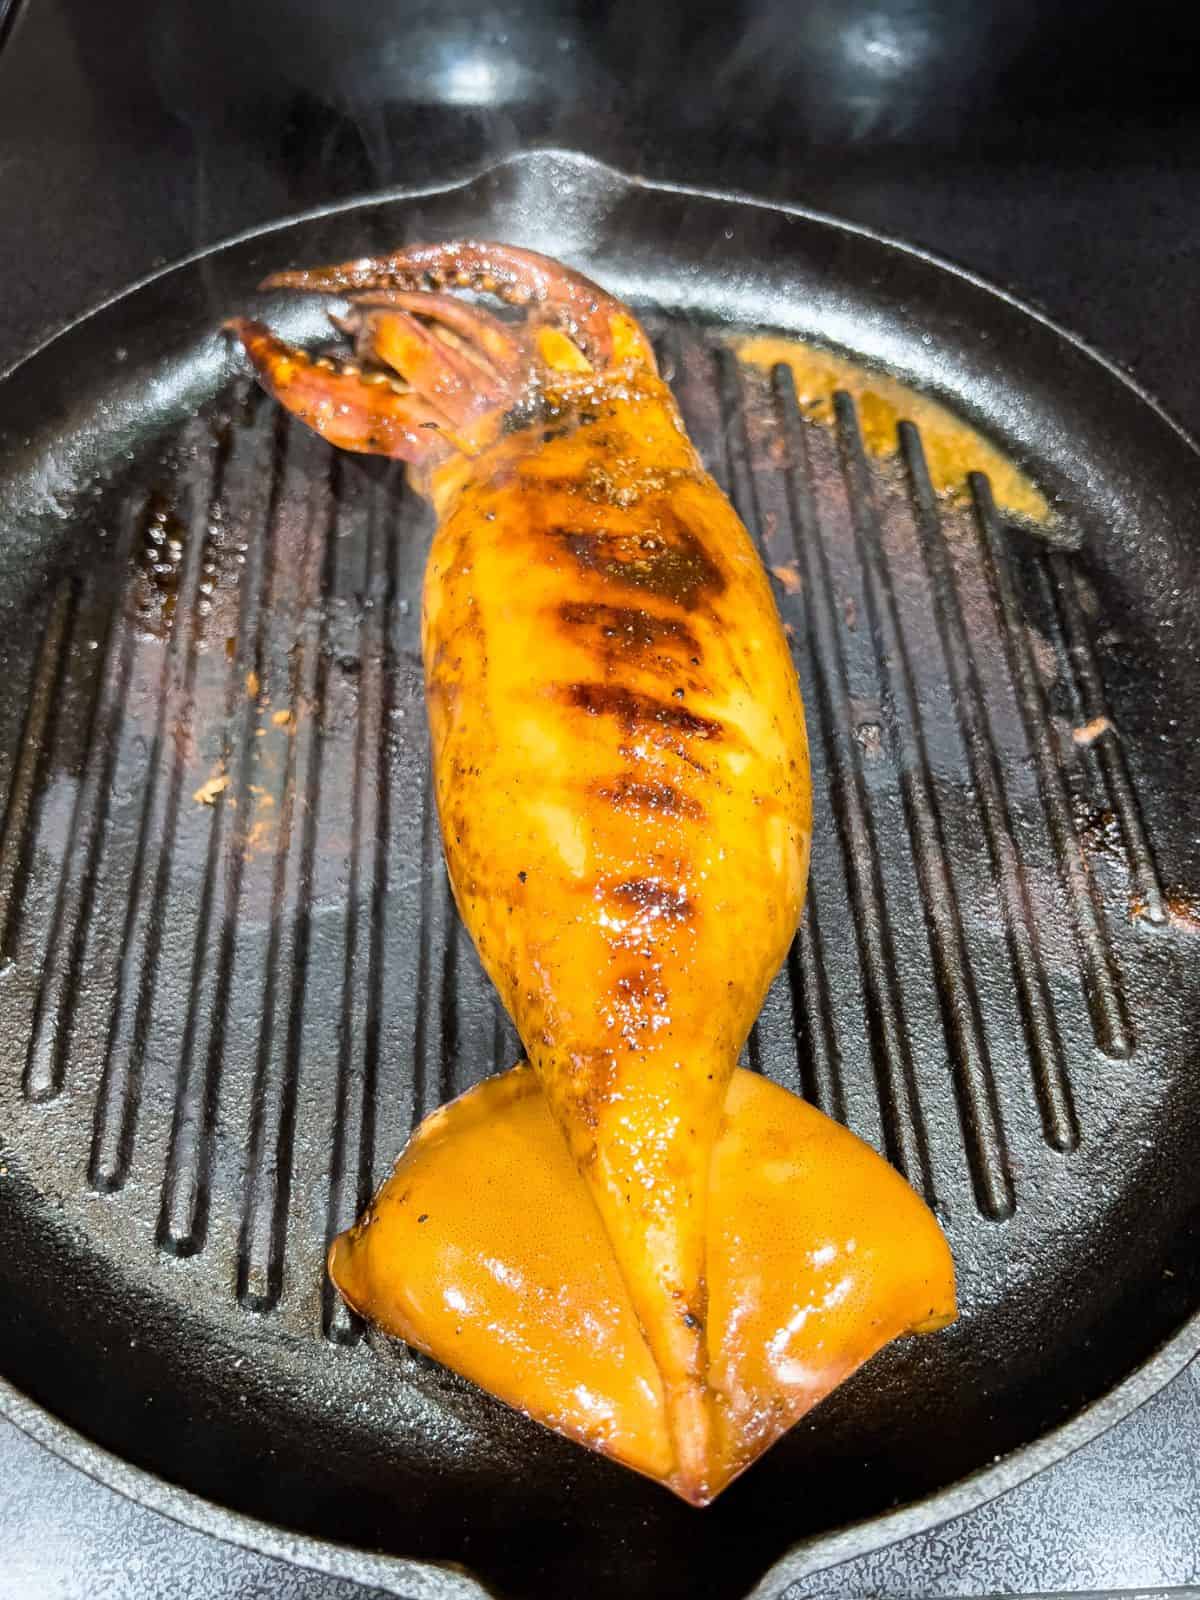 Grilling the squid in a stovetop griller.